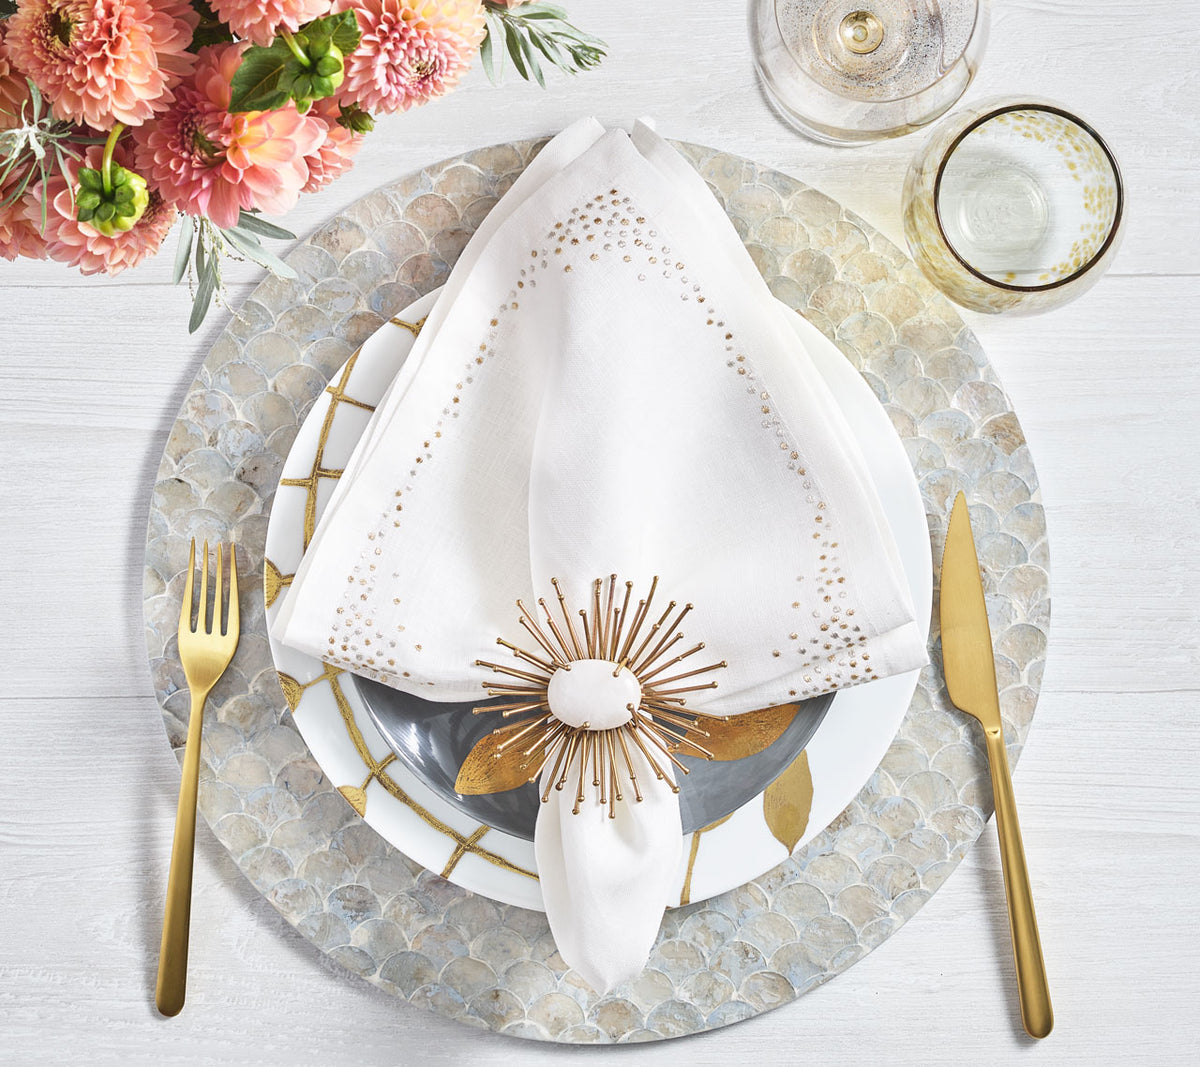 Place setting with gold accents like wine glasses, cutlery, a napkin ring and the white Pin Dot Napkin with its gold and silver border